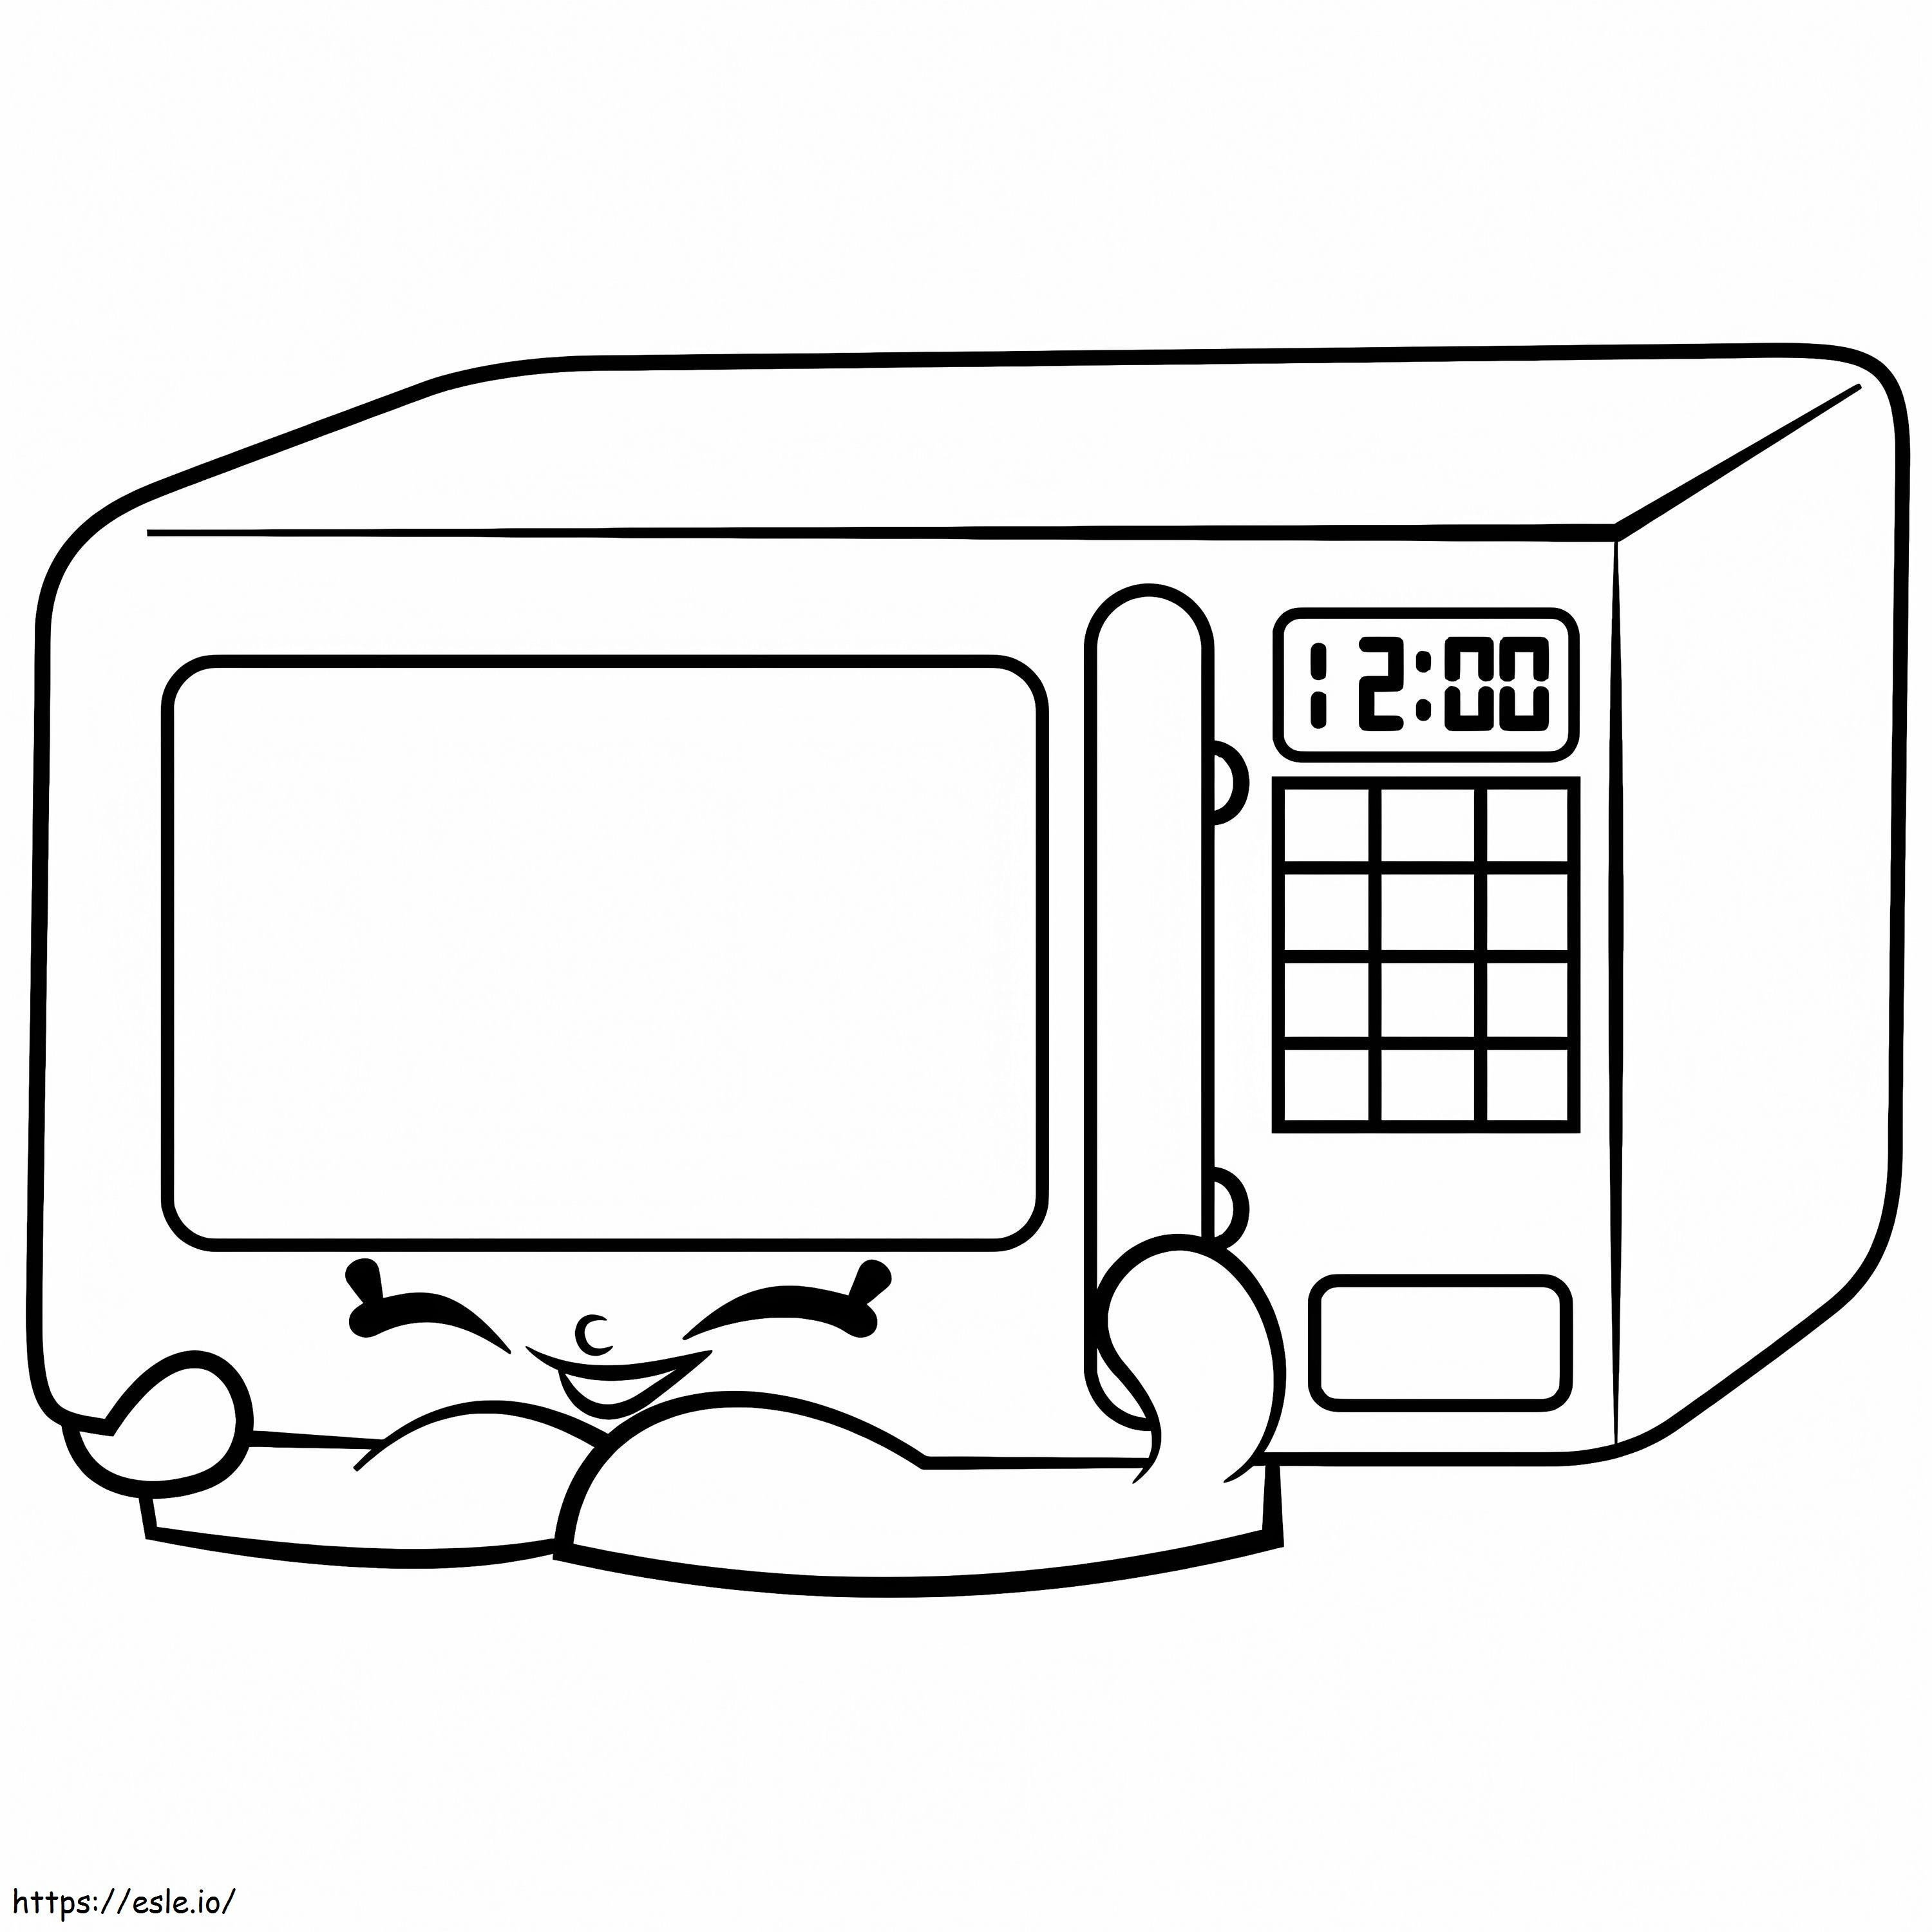 Zappy Microwave Shopkins coloring page